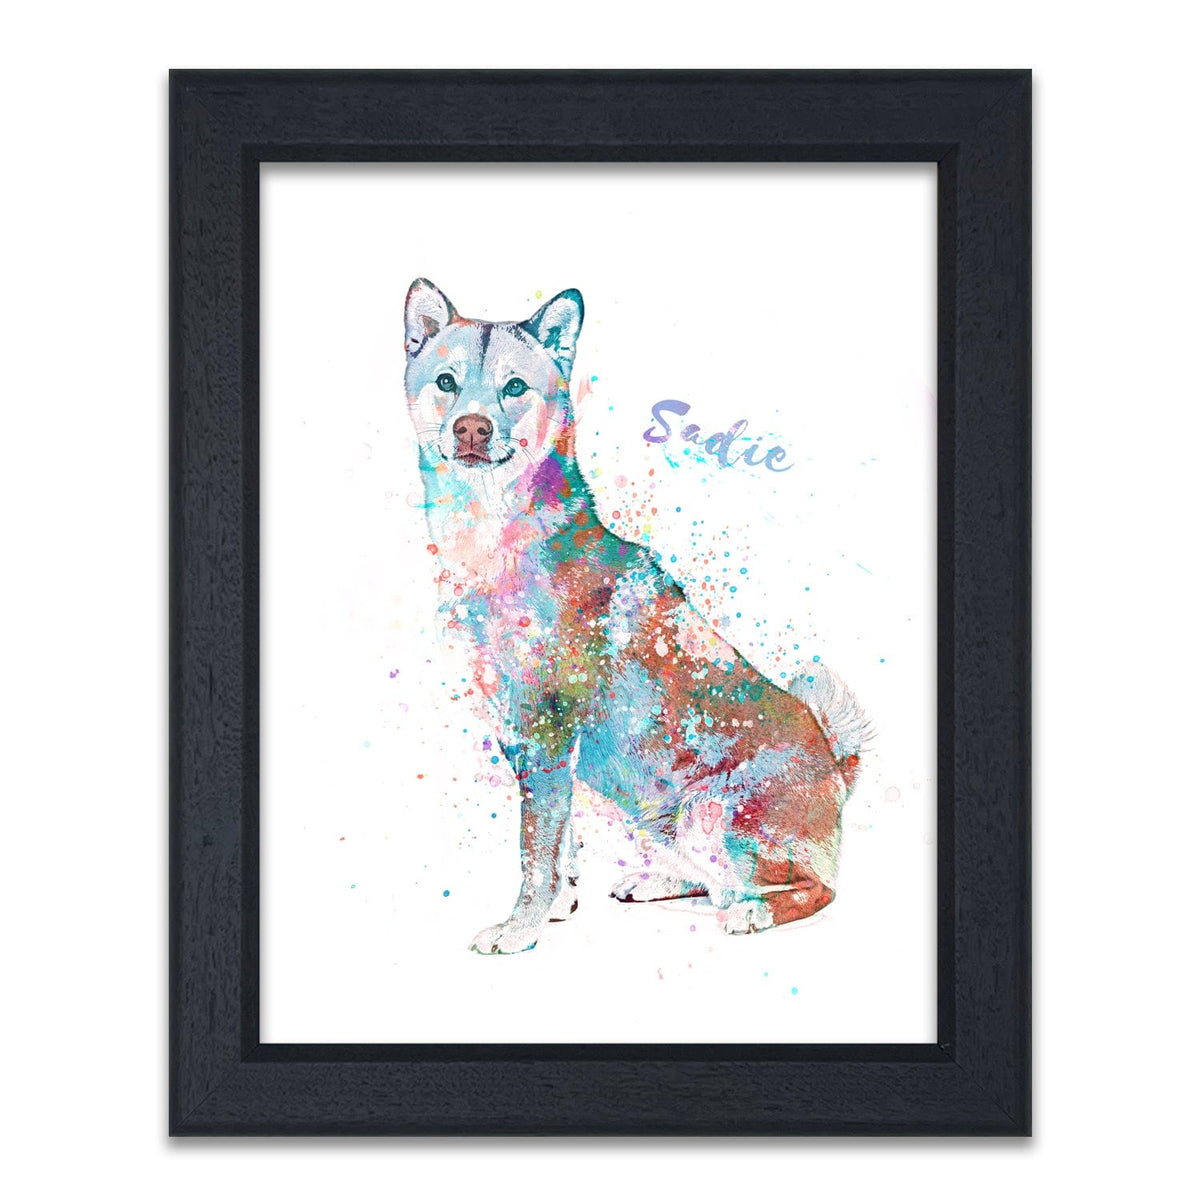 Framed Shiba Inu Art From Personal-Prints